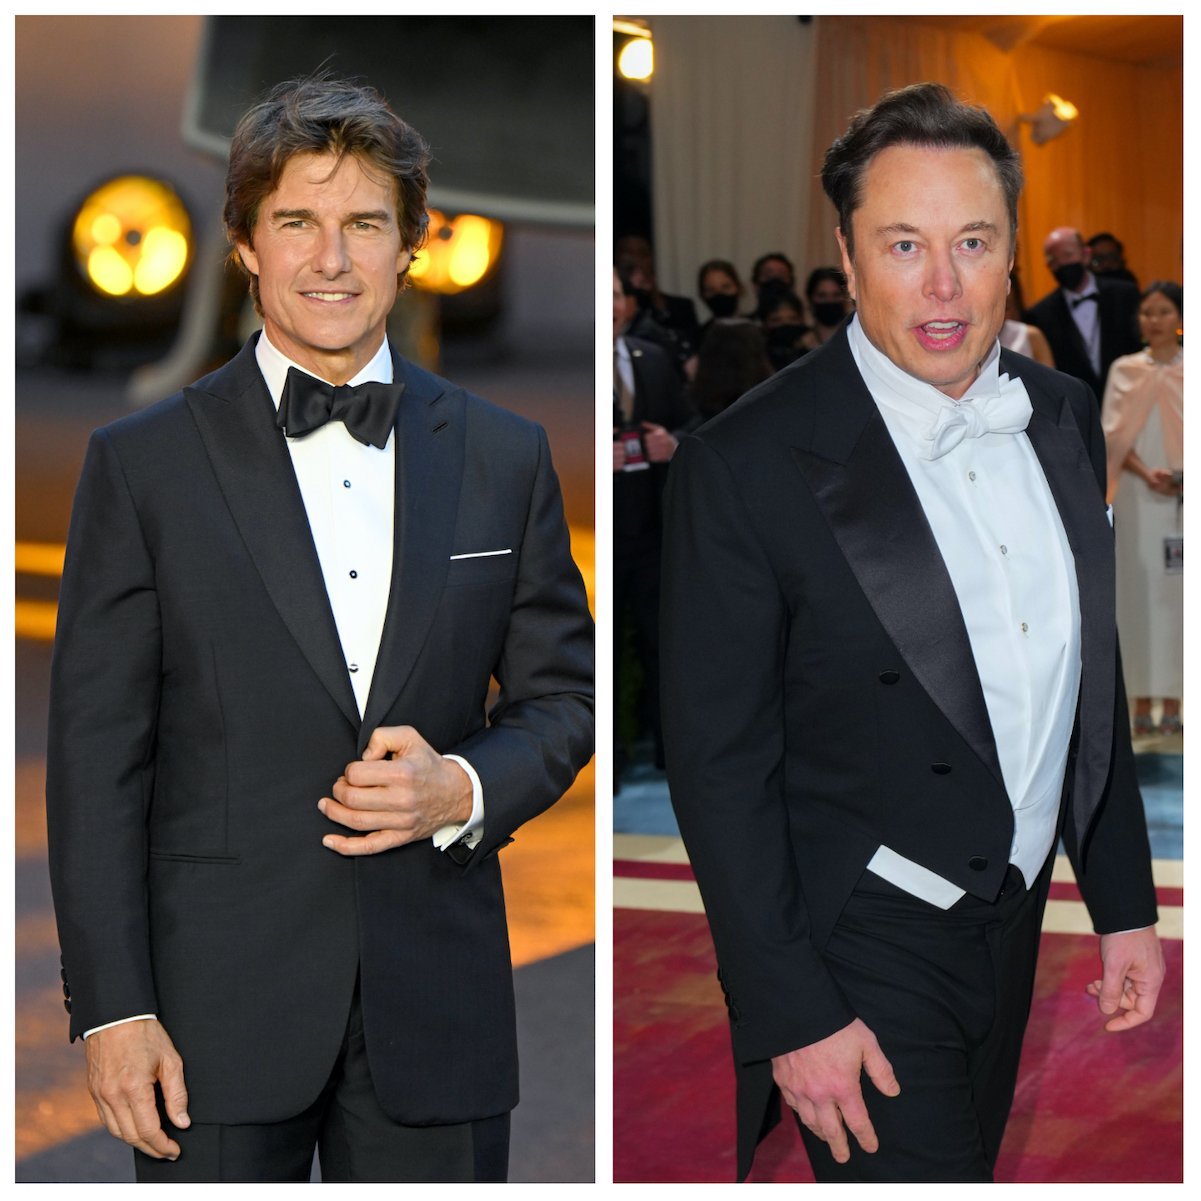 Tom Cruise and Elon Musk, who both have a high net worth; pose at different events